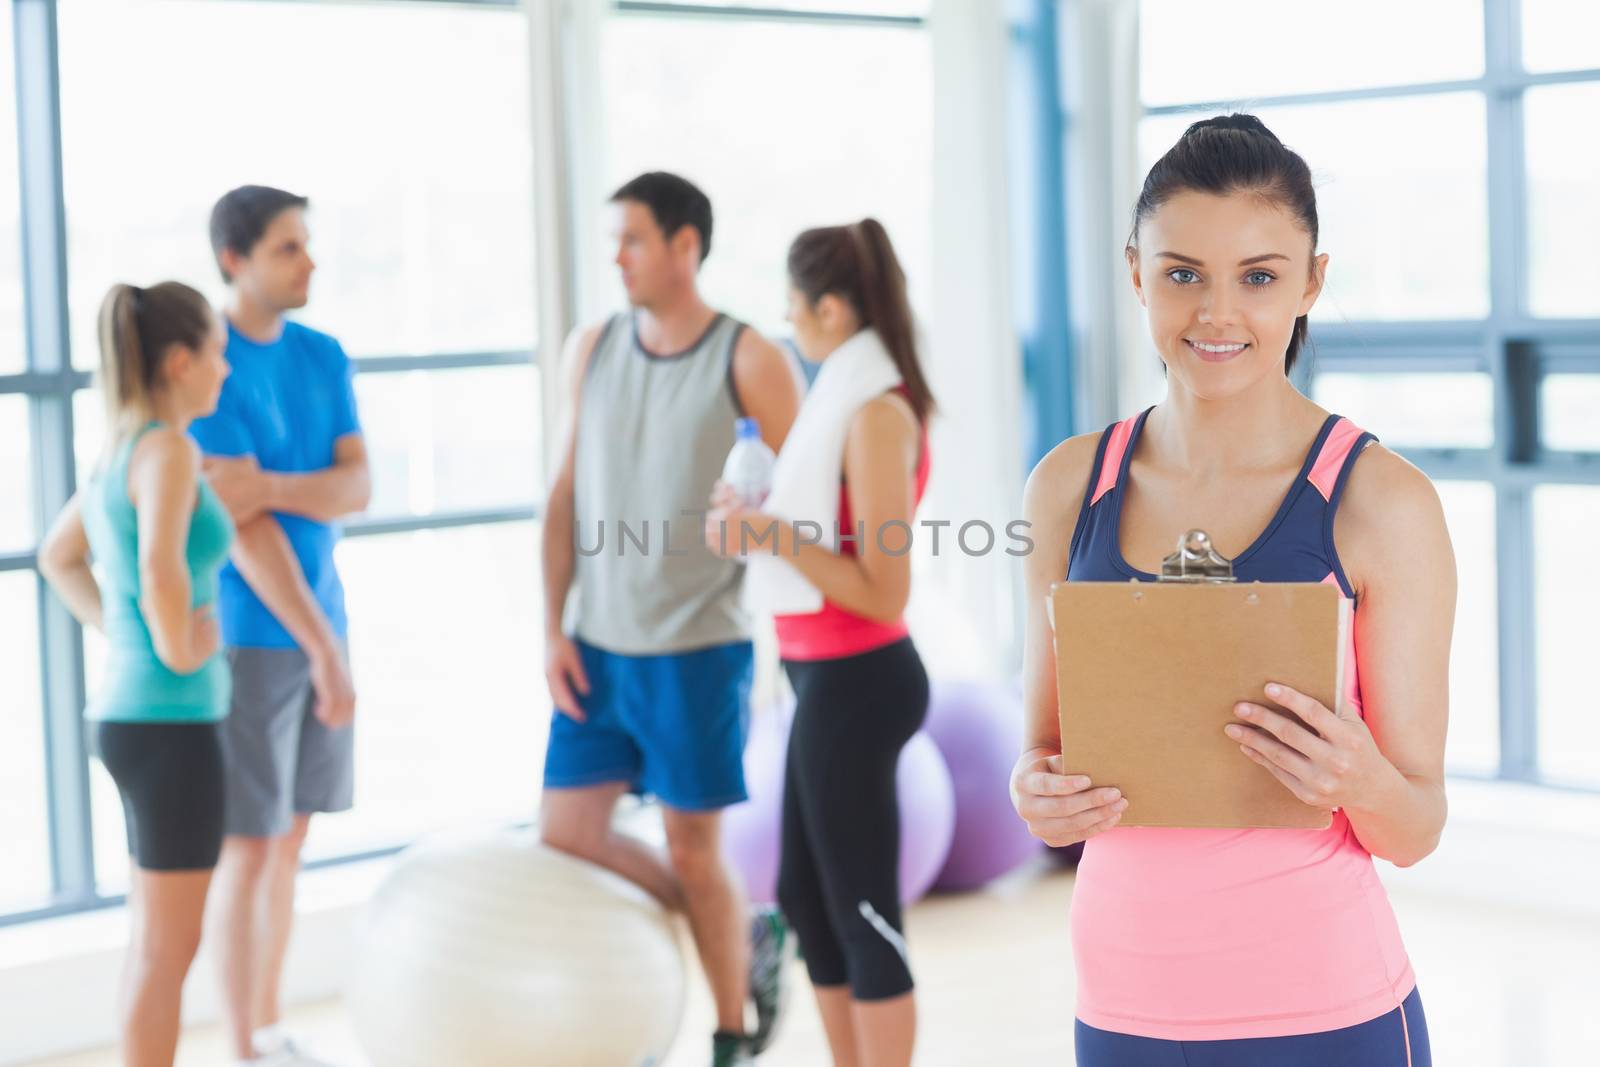 Instructor with fitness class in background in fitness studio by Wavebreakmedia